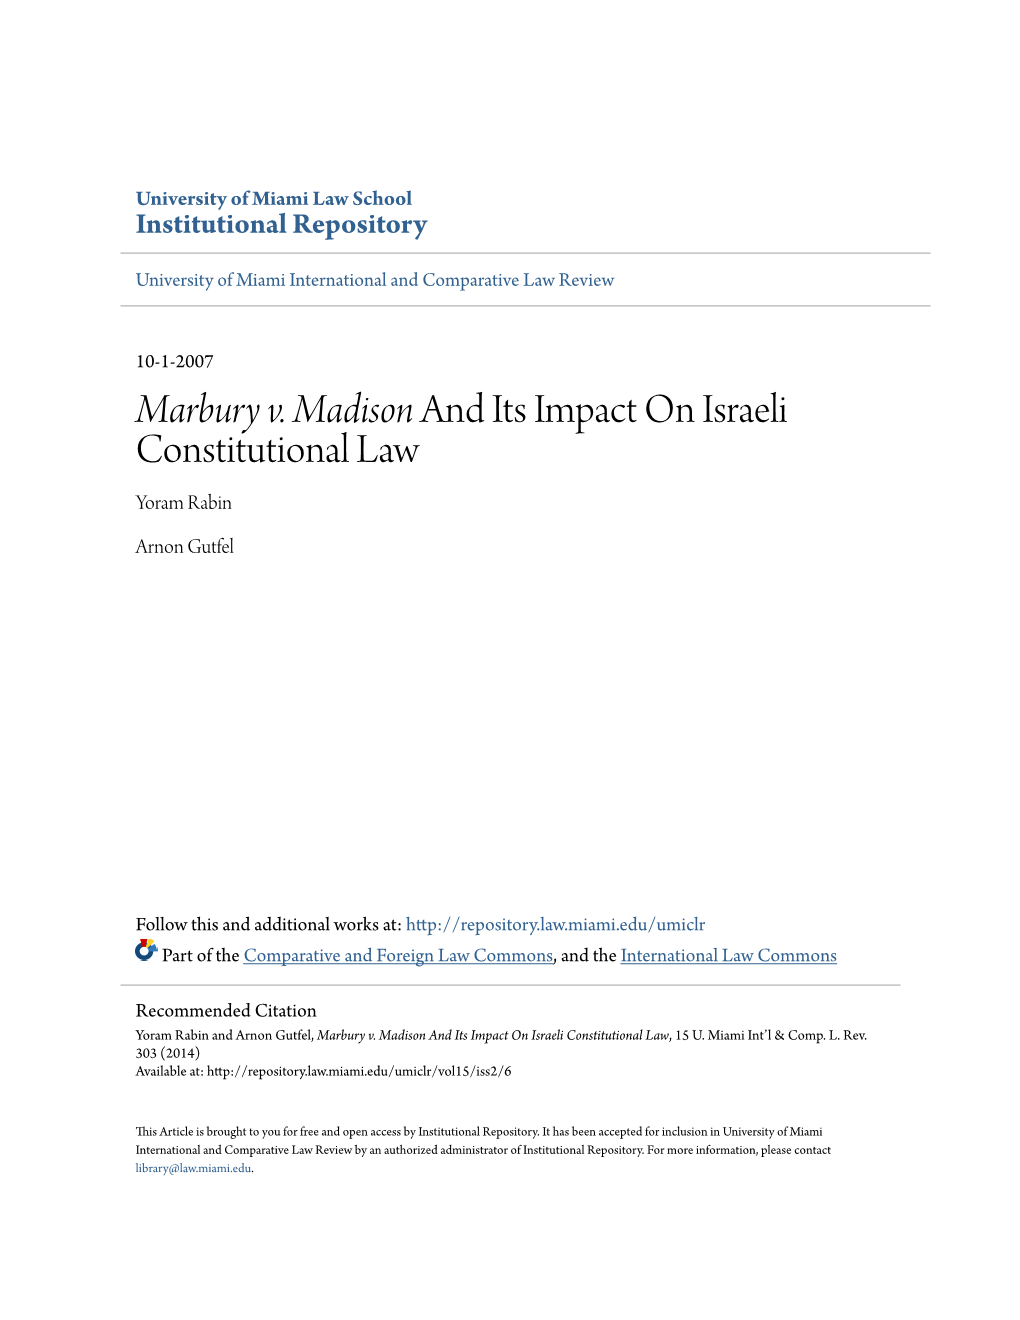 Marbury V. Madison and Its Impact on Israeli Constitutional Law Yoram Rabin